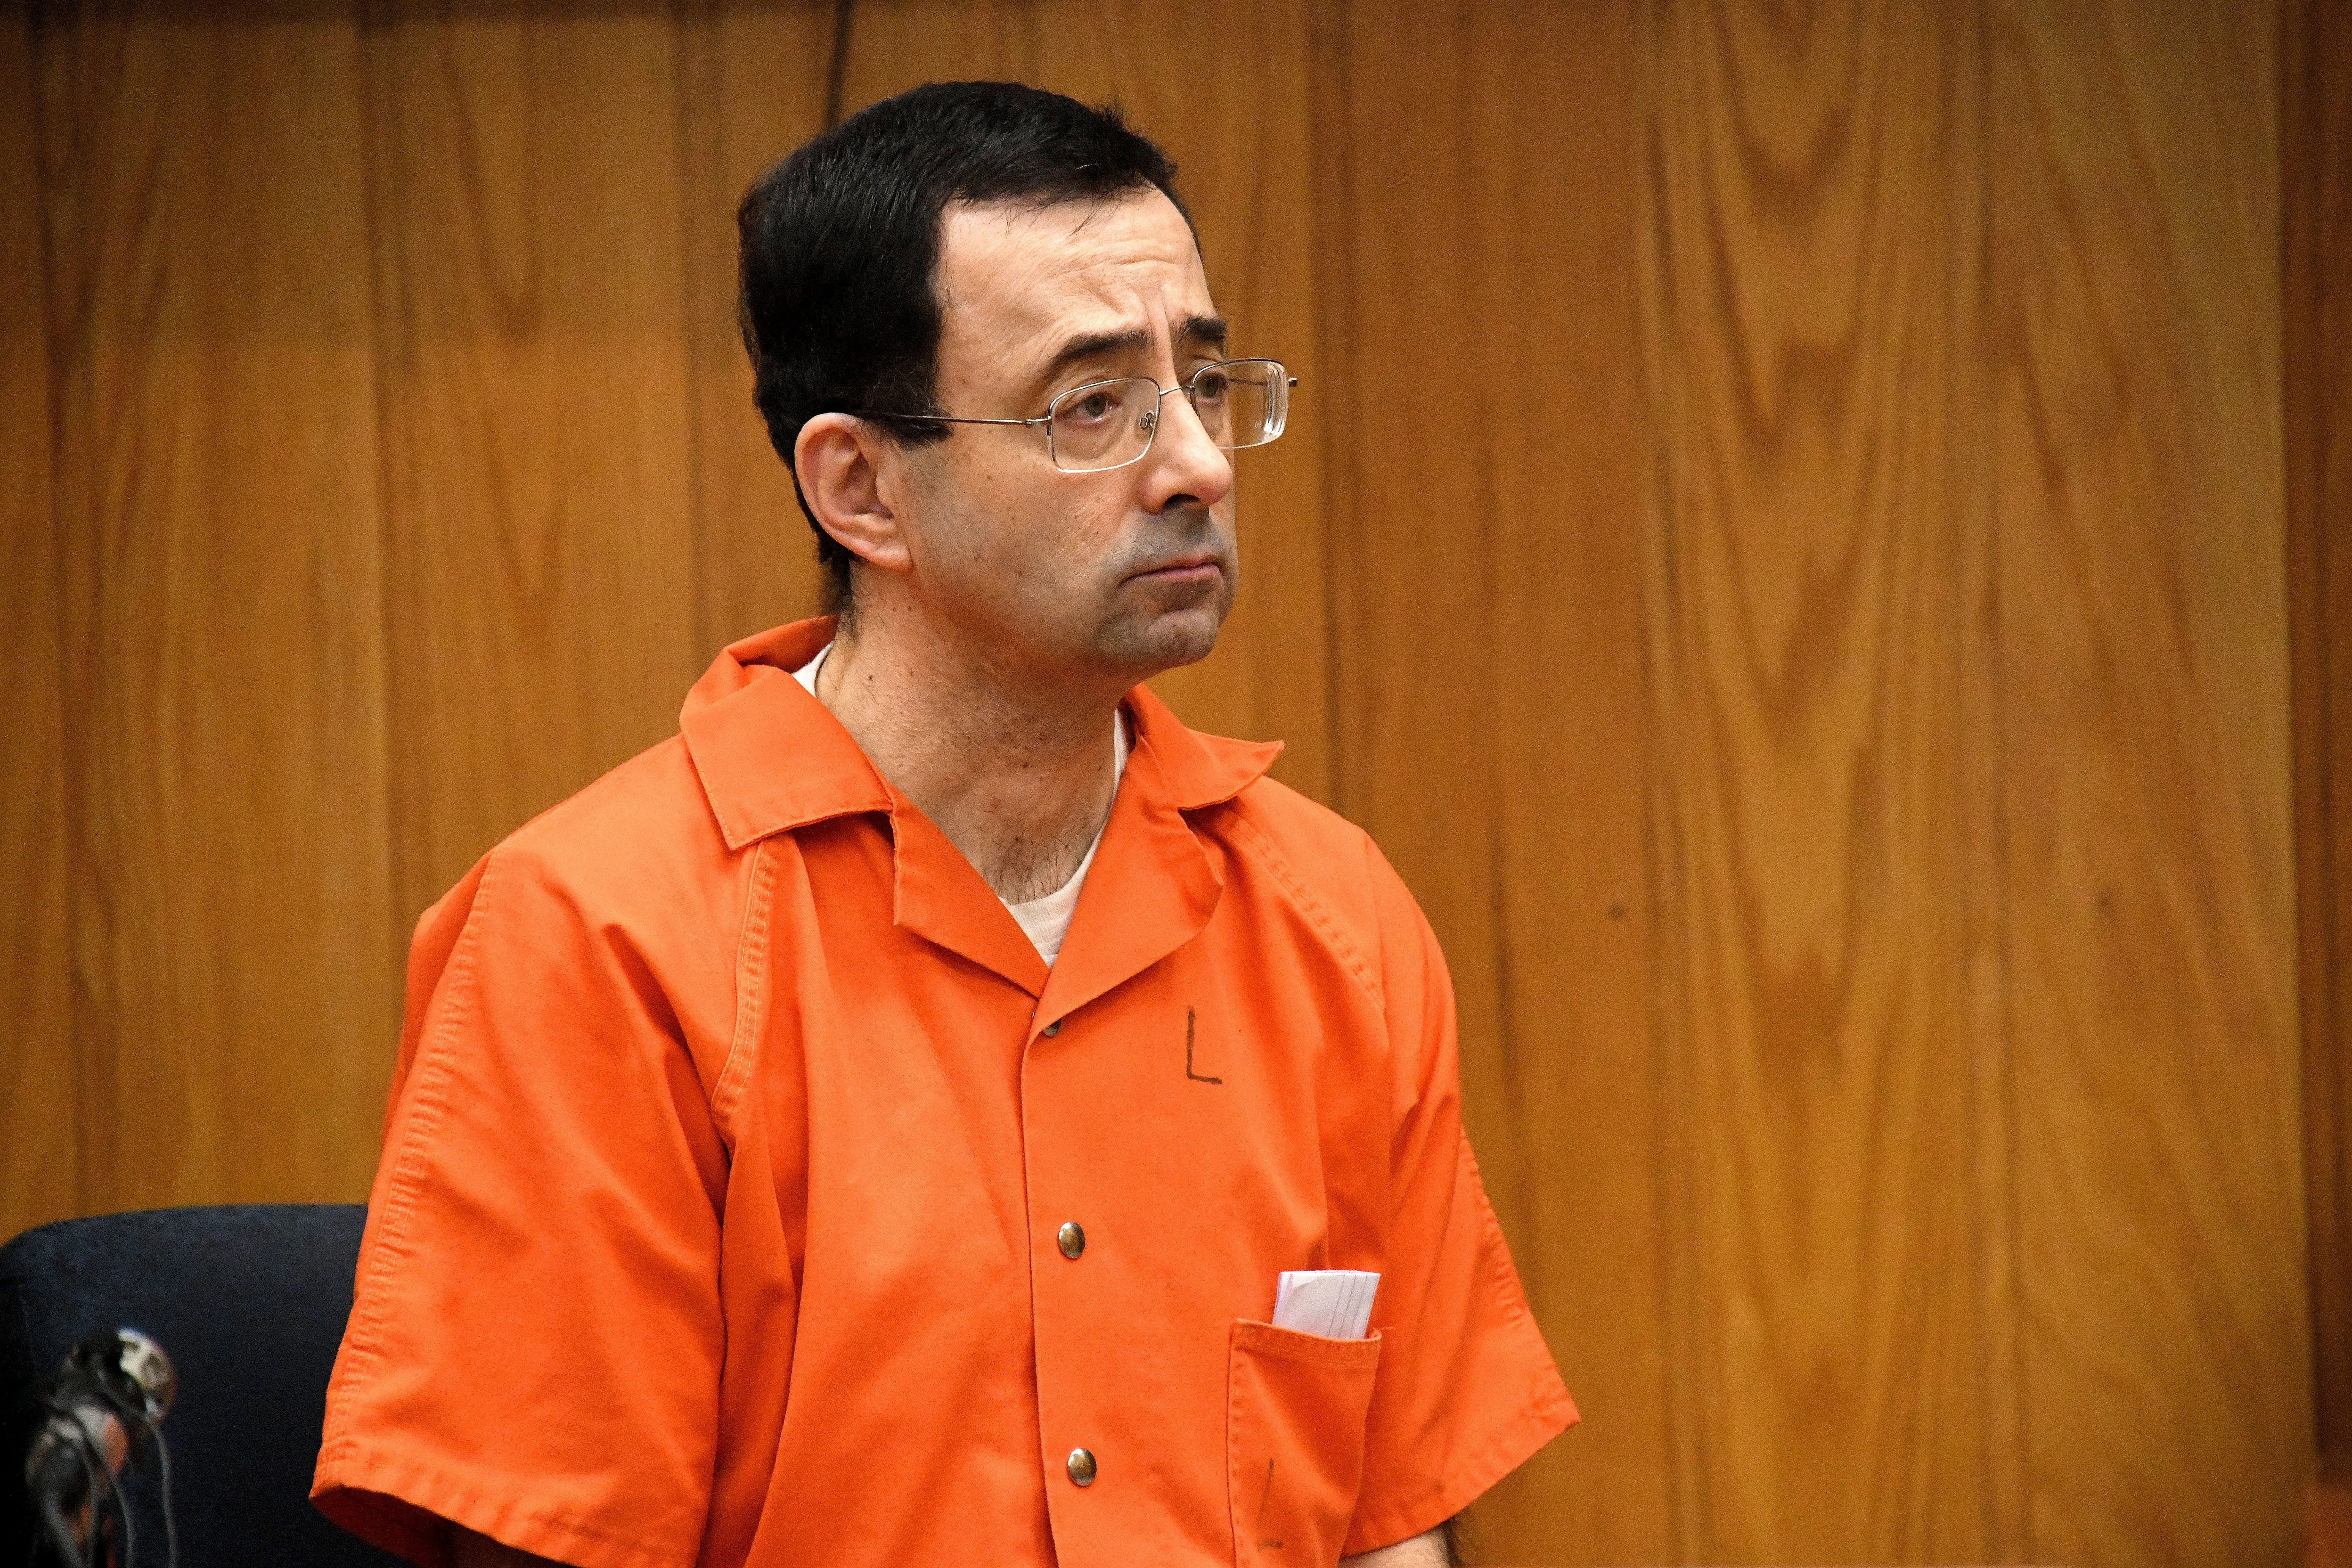 Larry Nassar appears in the court of Judge Janice Cunningham and receives a sentence of 40-125 years in prison on Monday, Feb. 5, 2018 in Charlotte, Michigan.